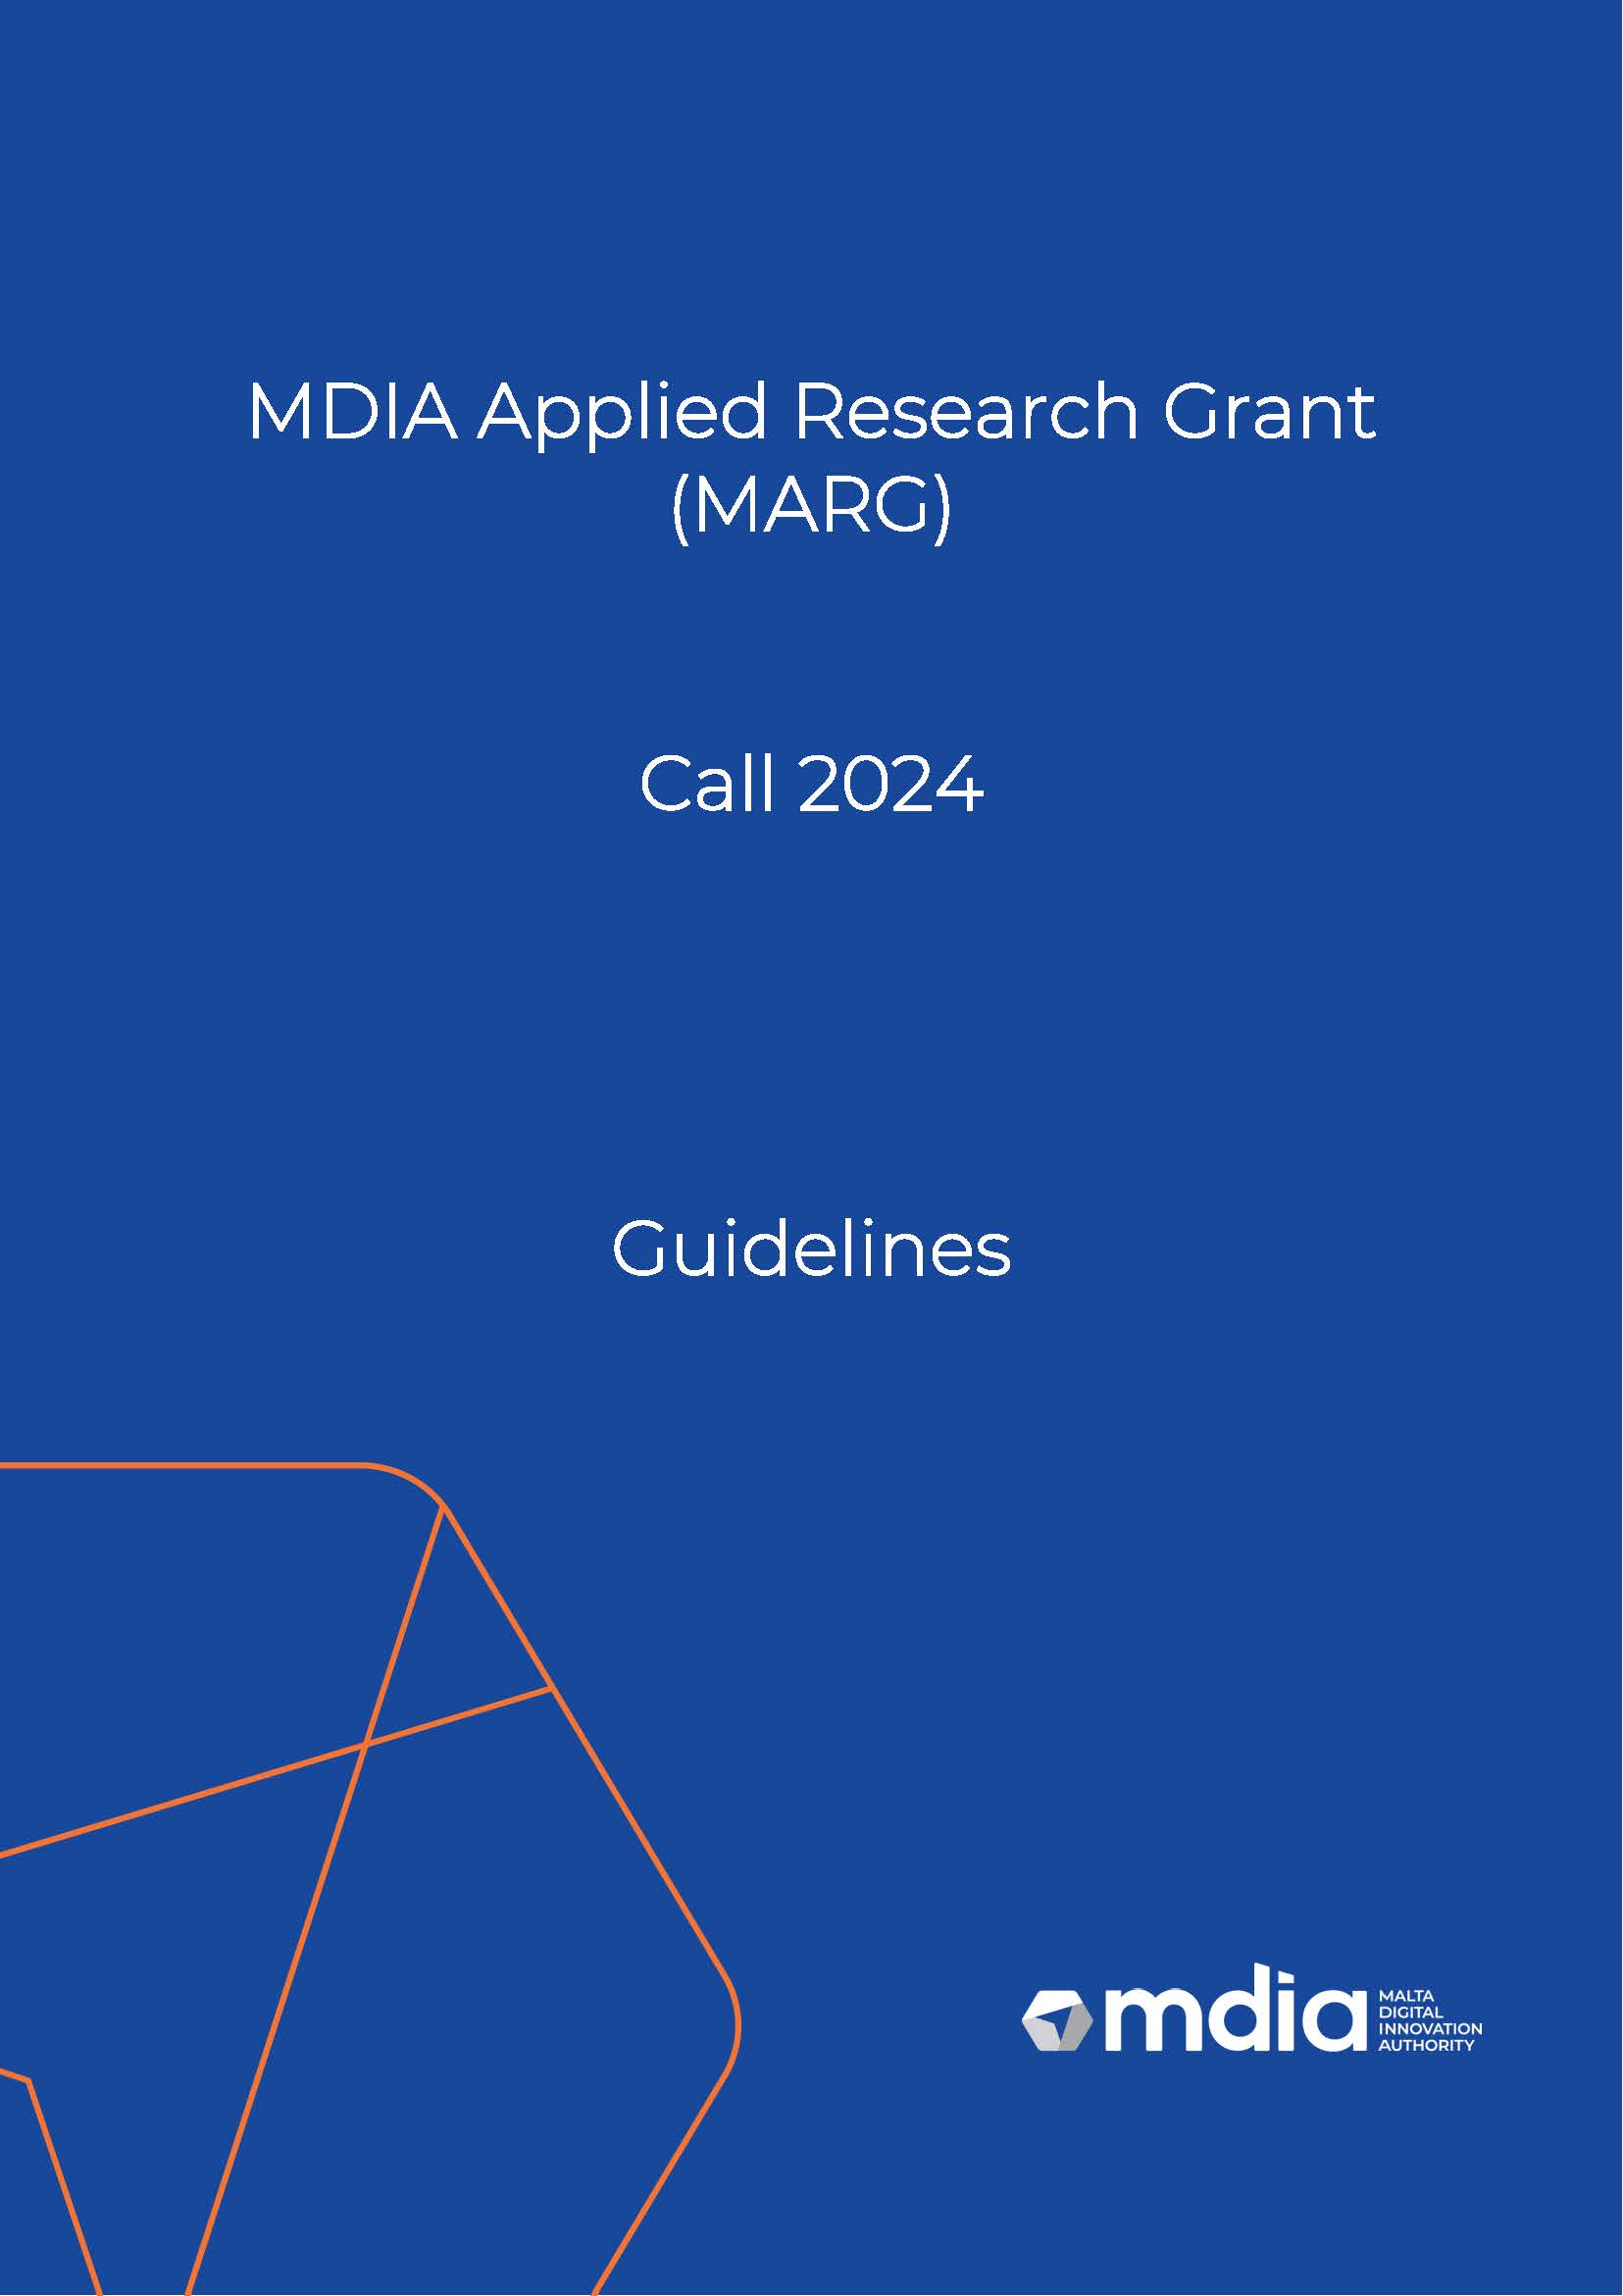 MDIA - MARG Guidelines 2024 - Cover